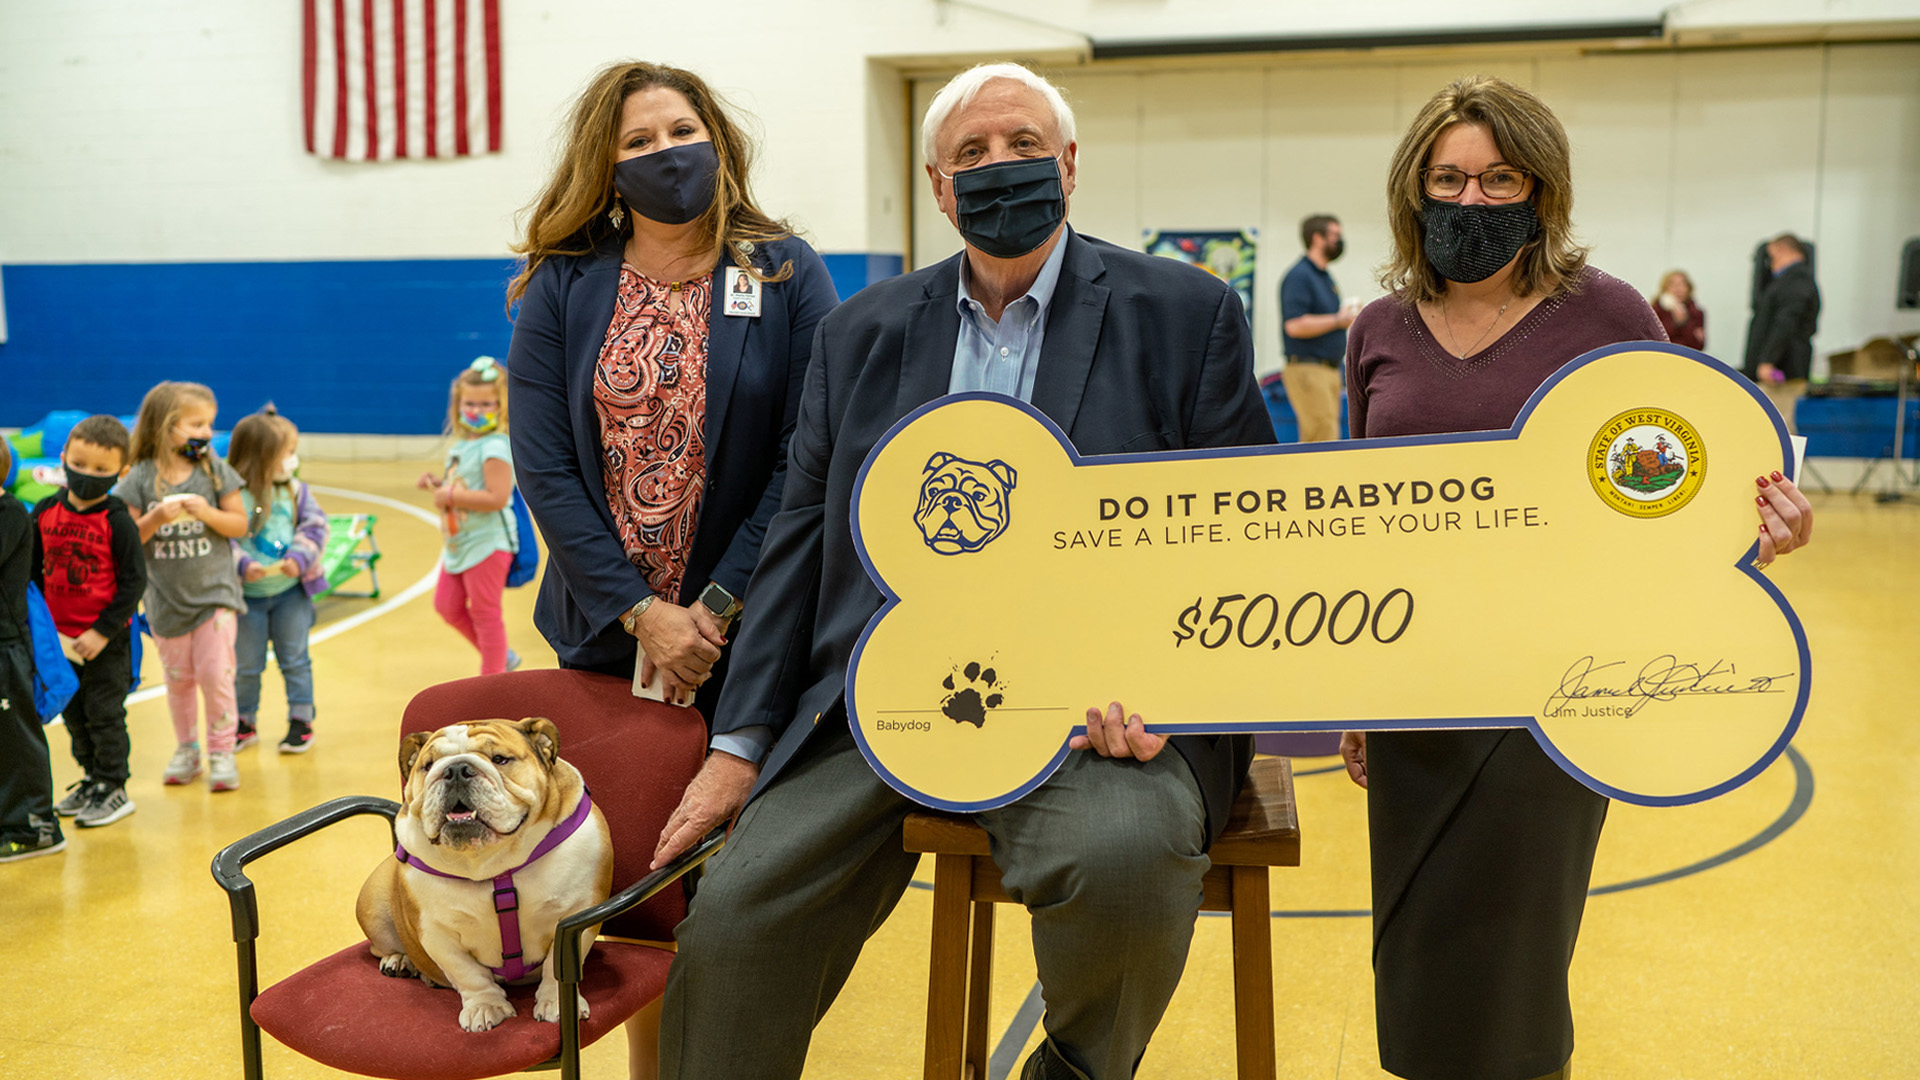 Do it for Babydog Round 3: Gov. Justice and Babydog present $50,000 check, host party for students at Cameron Elementary School - Governor Jim Justice